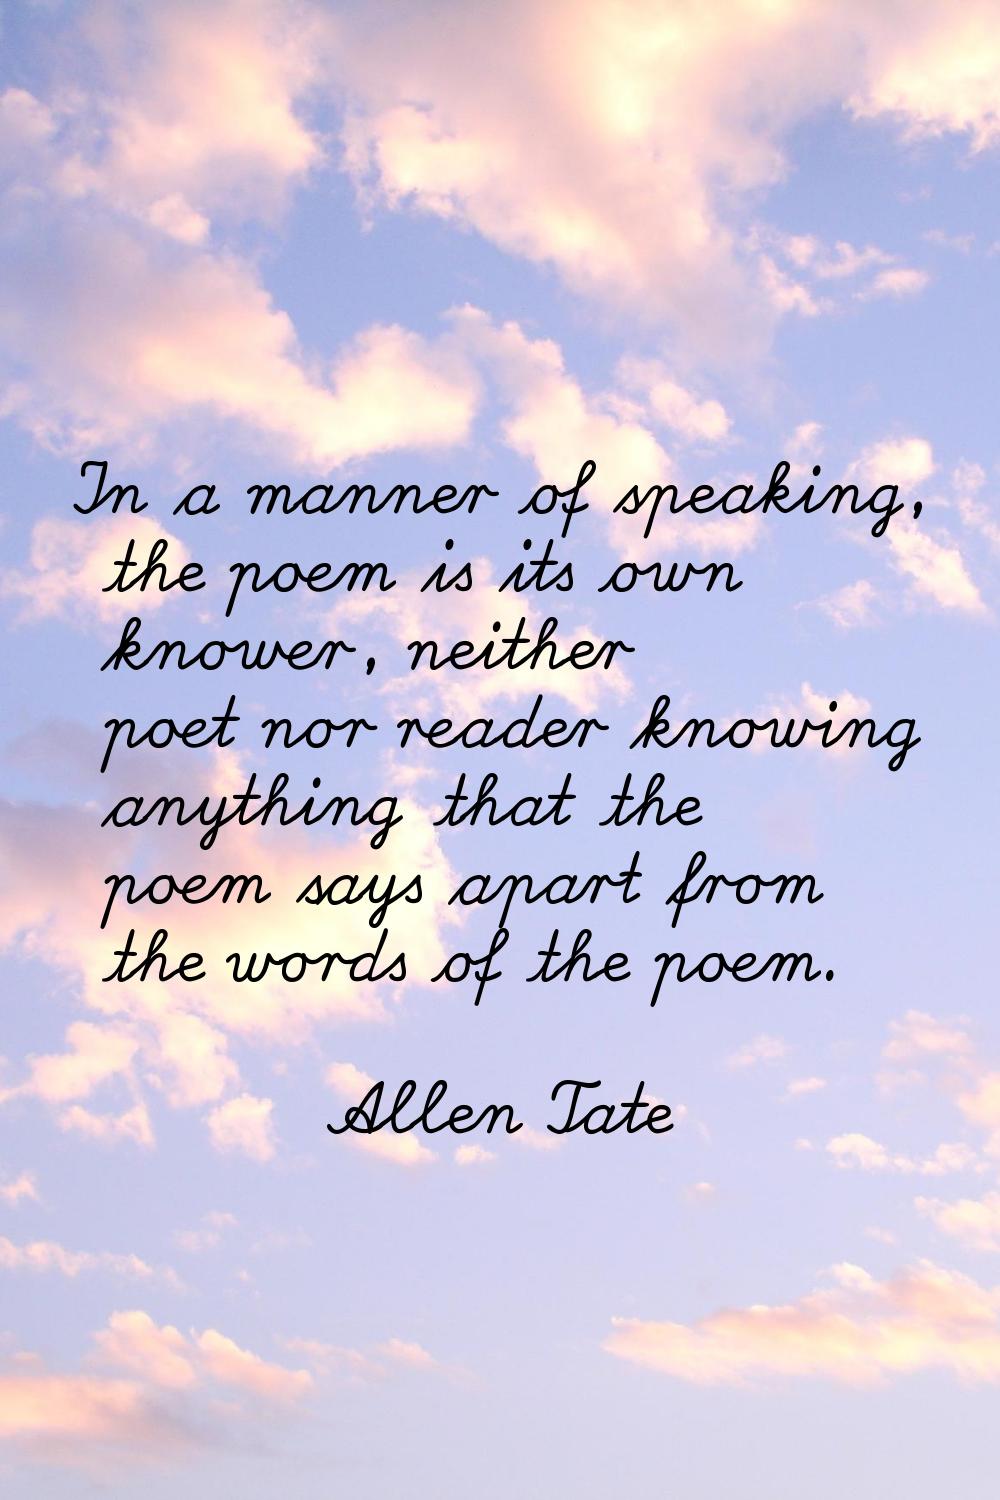 In a manner of speaking, the poem is its own knower, neither poet nor reader knowing anything that 